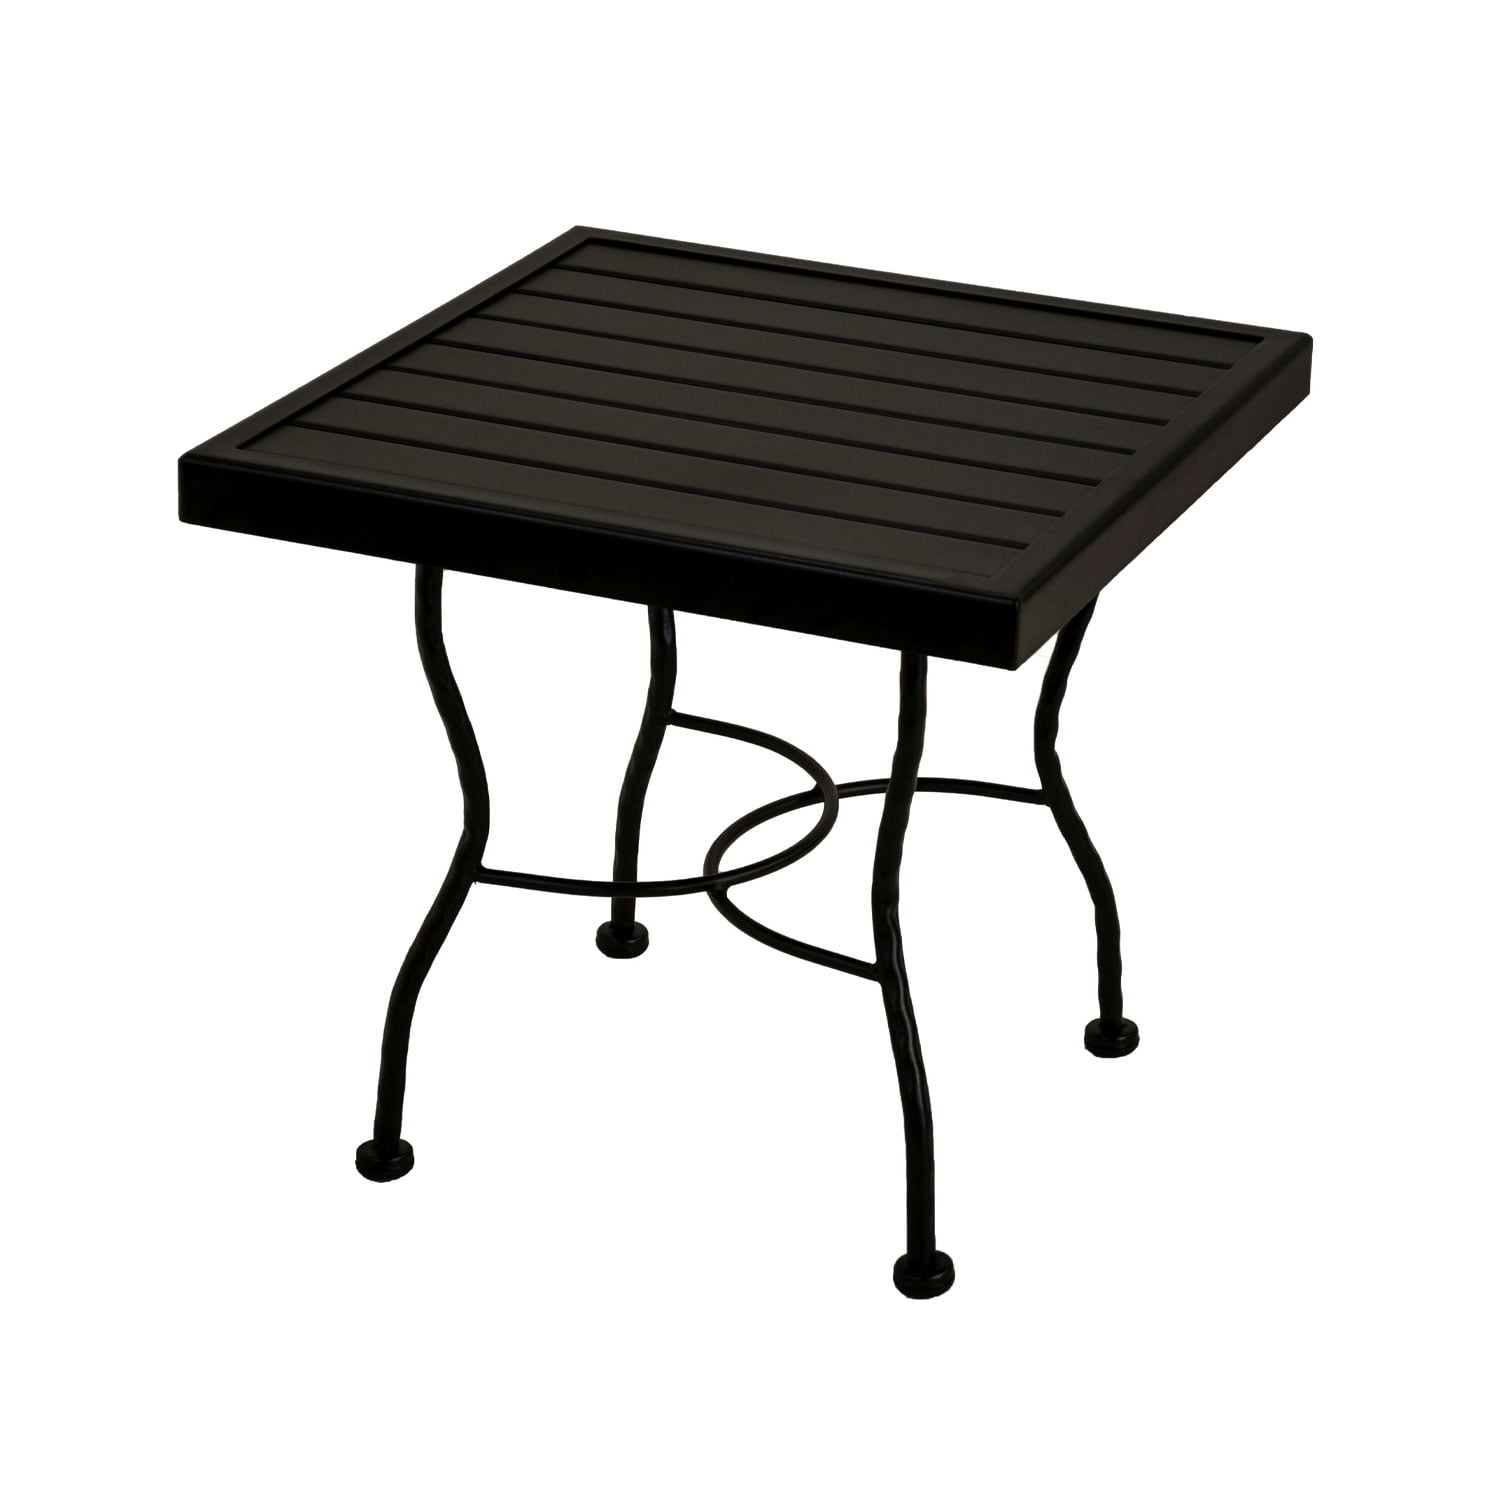 Meadowcraft Powder Coated Wrought Iron, Small Black Wrought Iron Patio Side Table